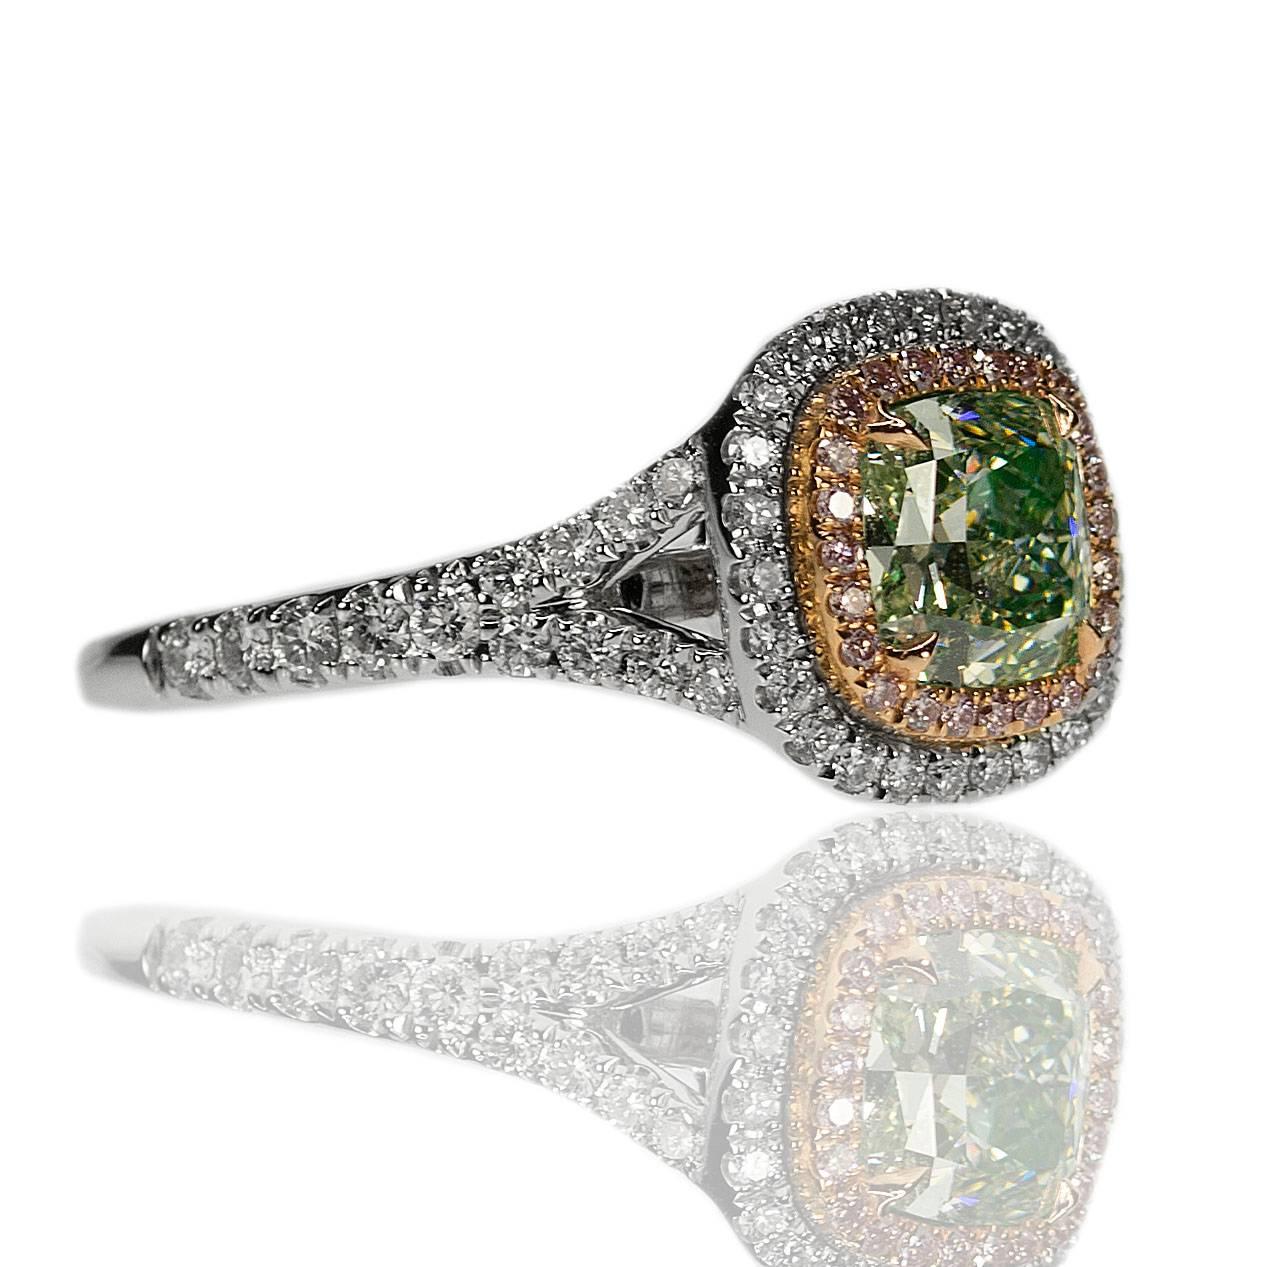 18k Ring with GIA cerified Natural Light Fancy Grayish, Yellowish Green VS1 Radiiant Cut DIamond weighing 1.22 carats and twenty natural pink diamonds weighing 0.15 carats as well as fifty two white round brilliant diamonds weighing 0.36 carats,